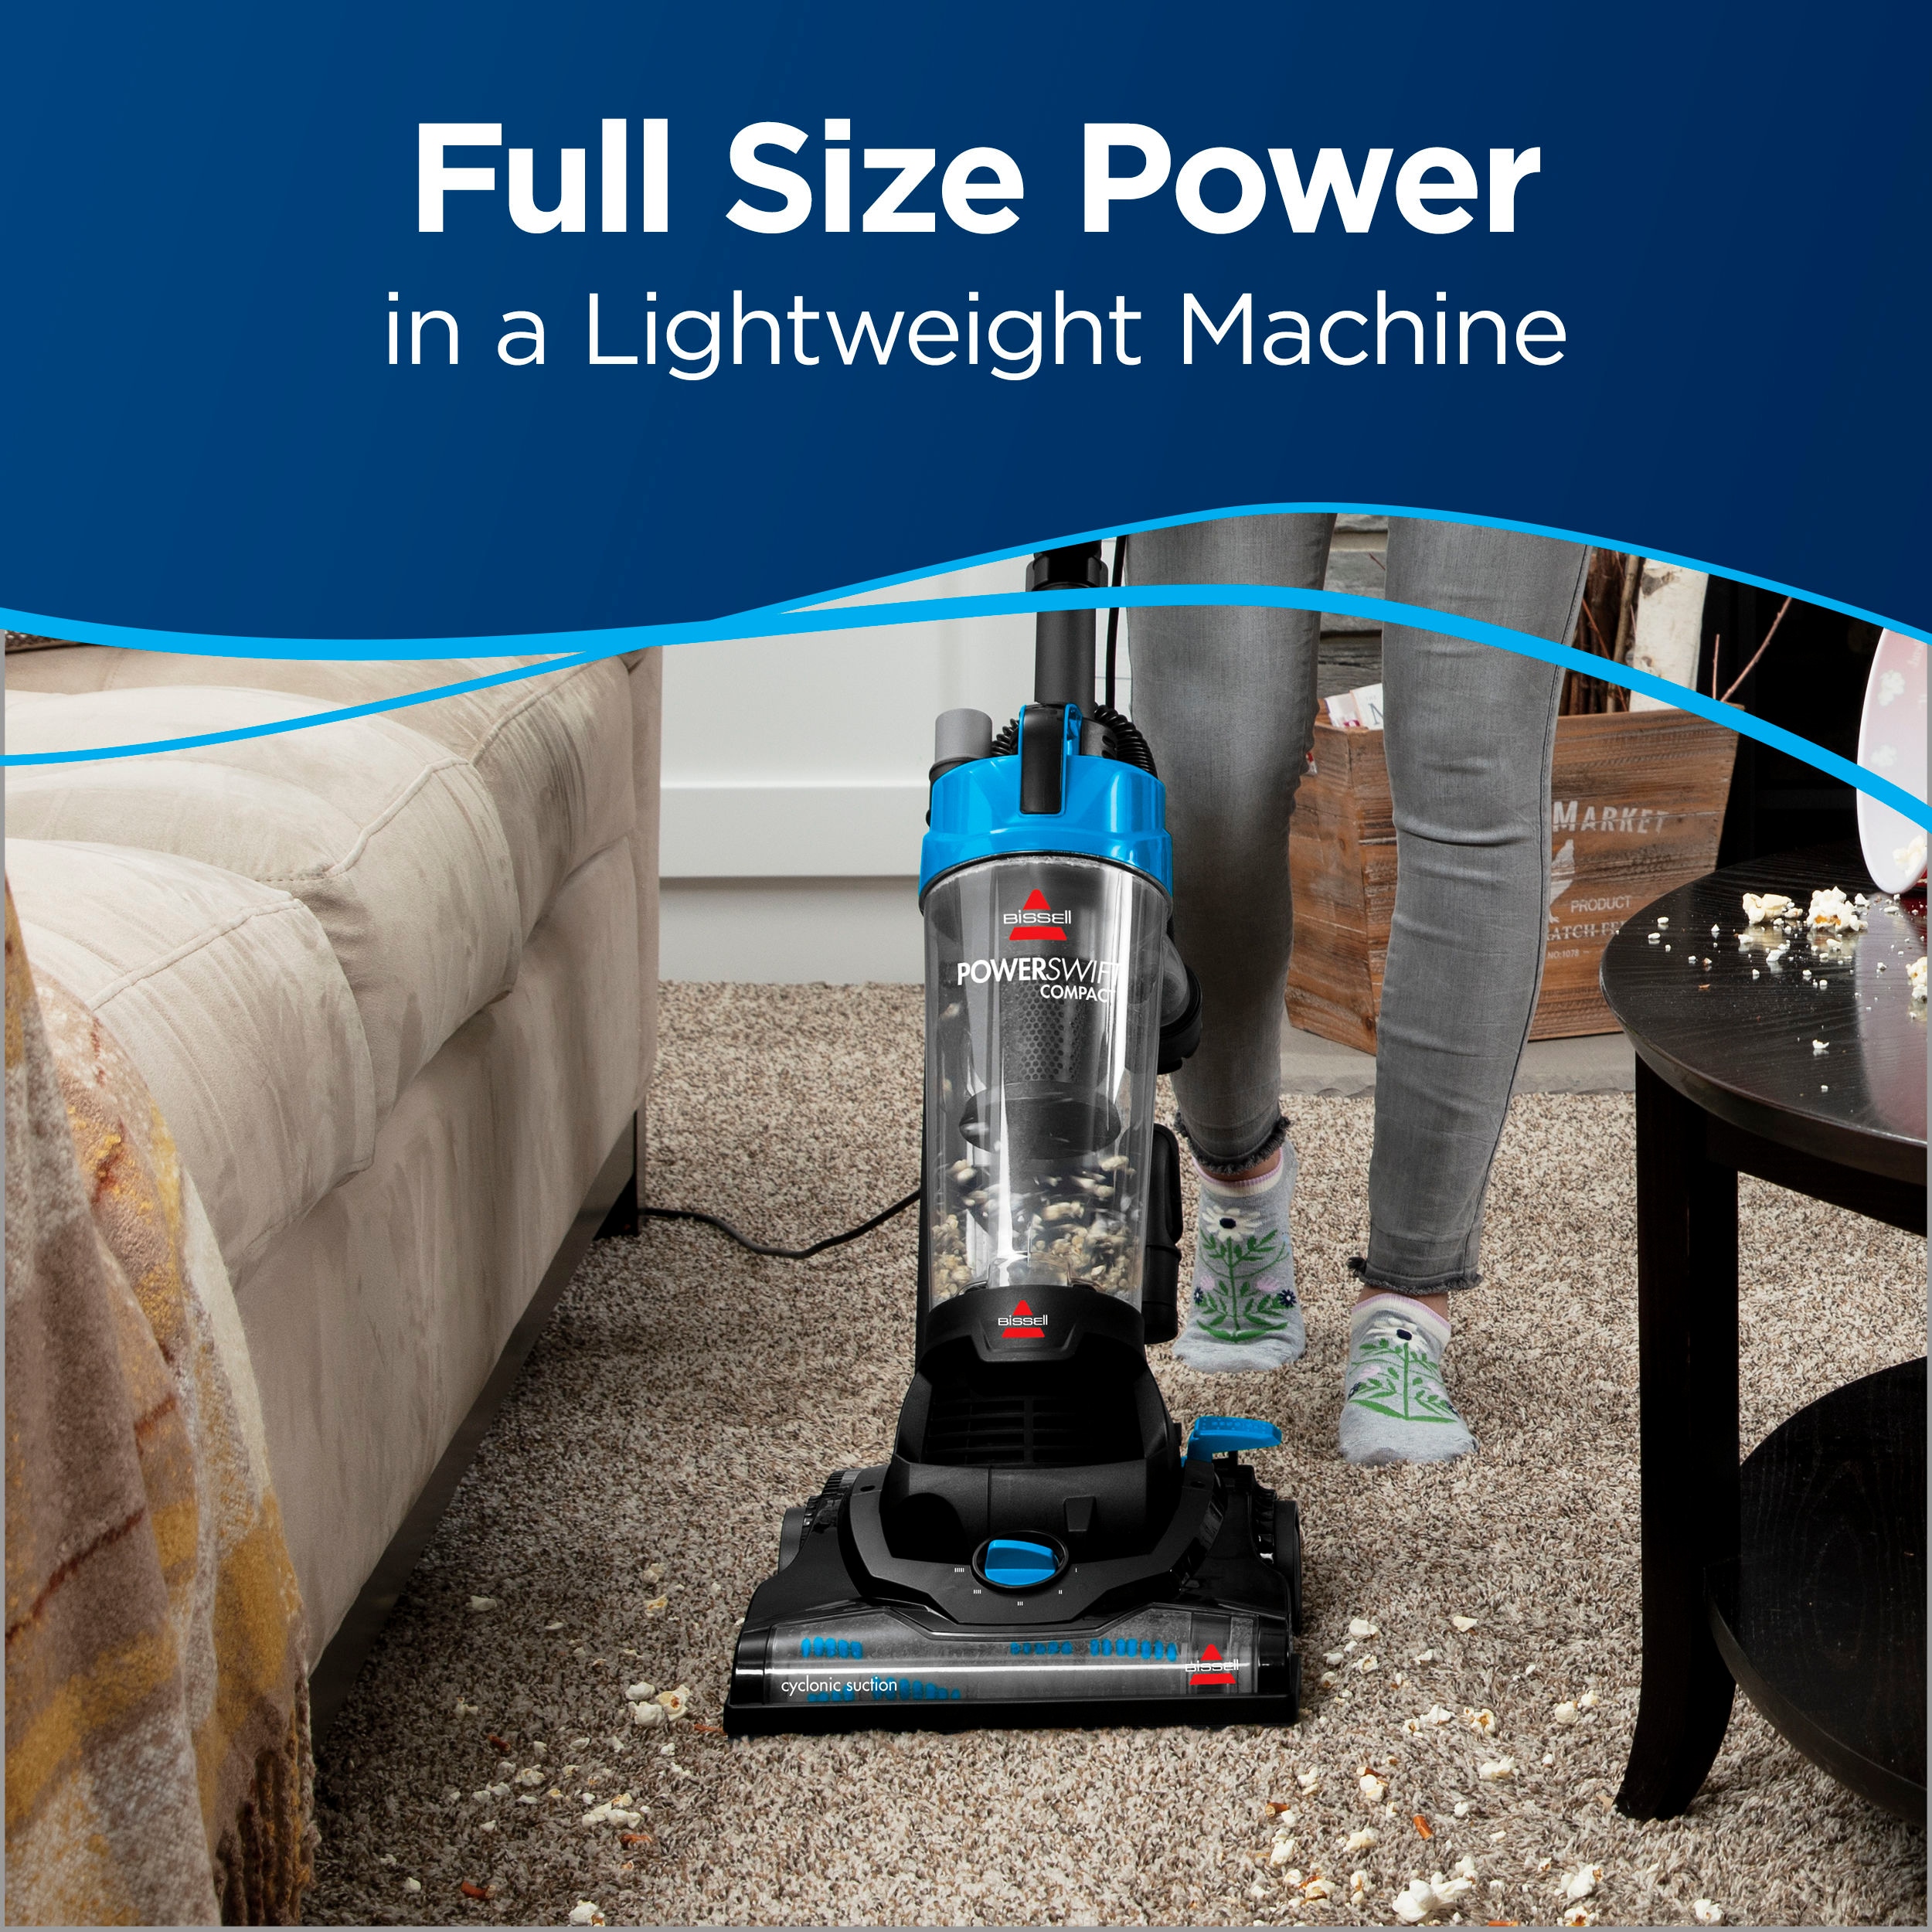 BISSELL PowerSwift Compact Corded Bagless Upright Vacuum in the Upright  Vacuums department at